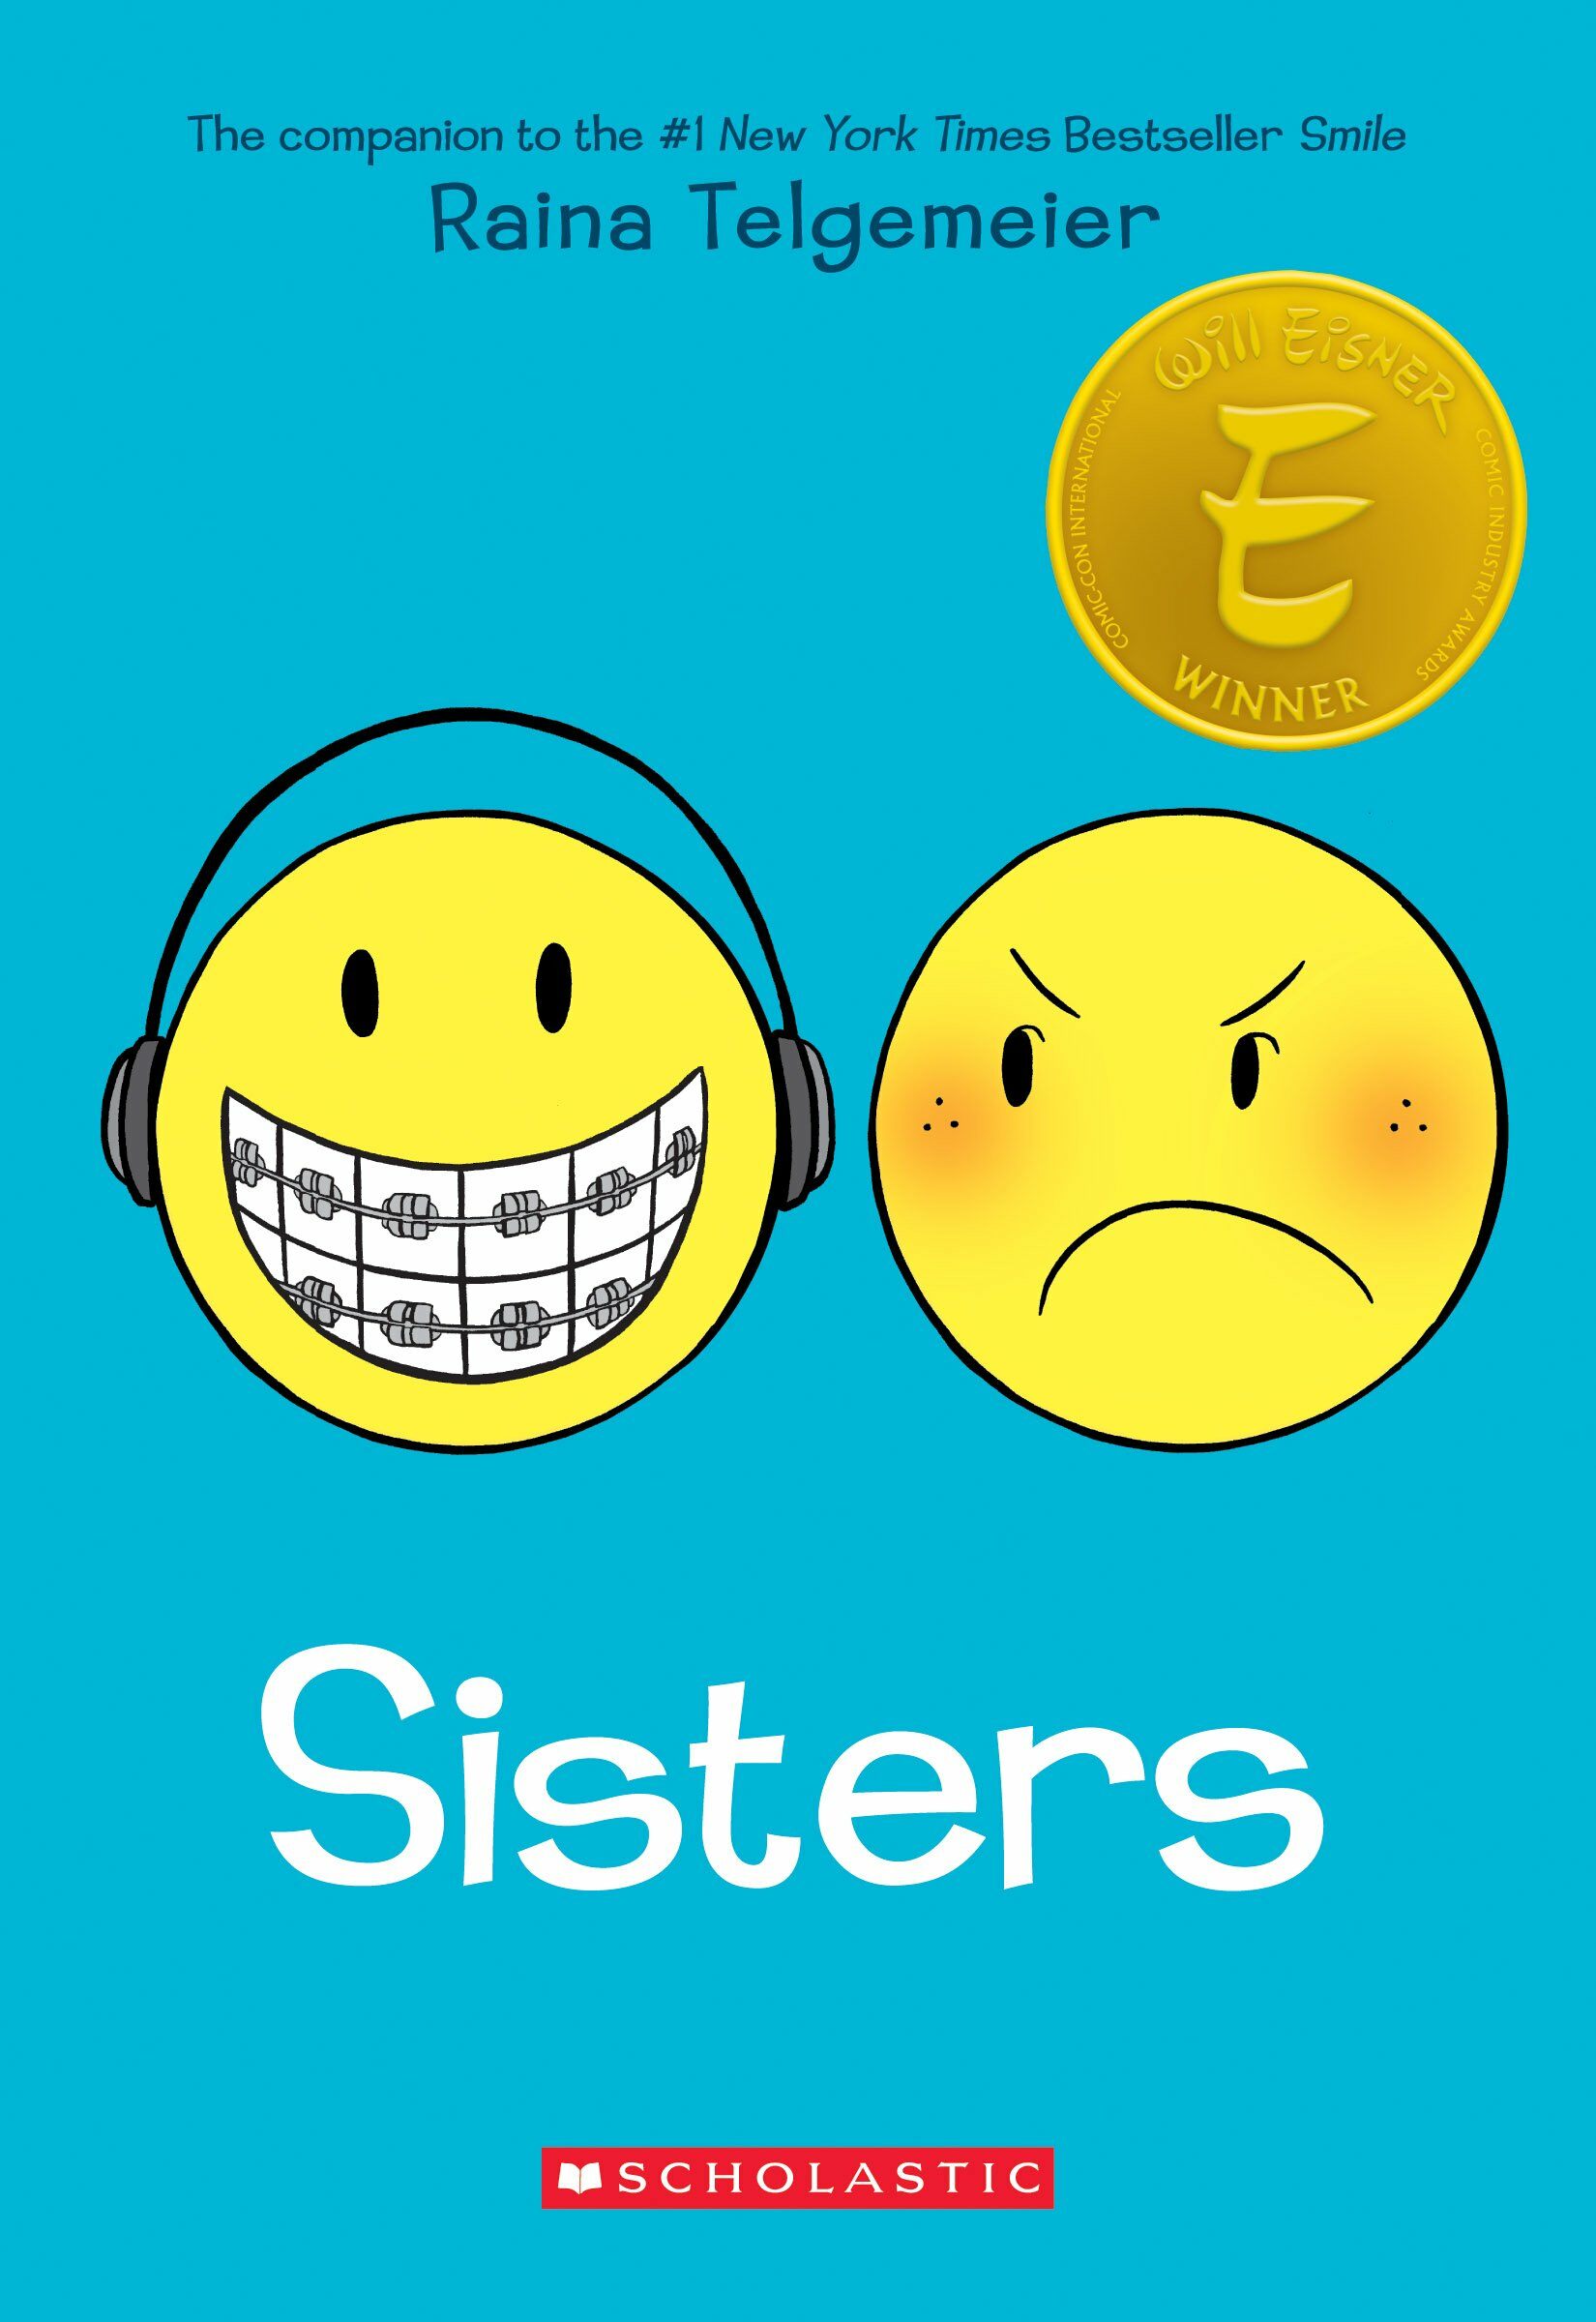 Sisters: A Graphic Novel (Paperback)